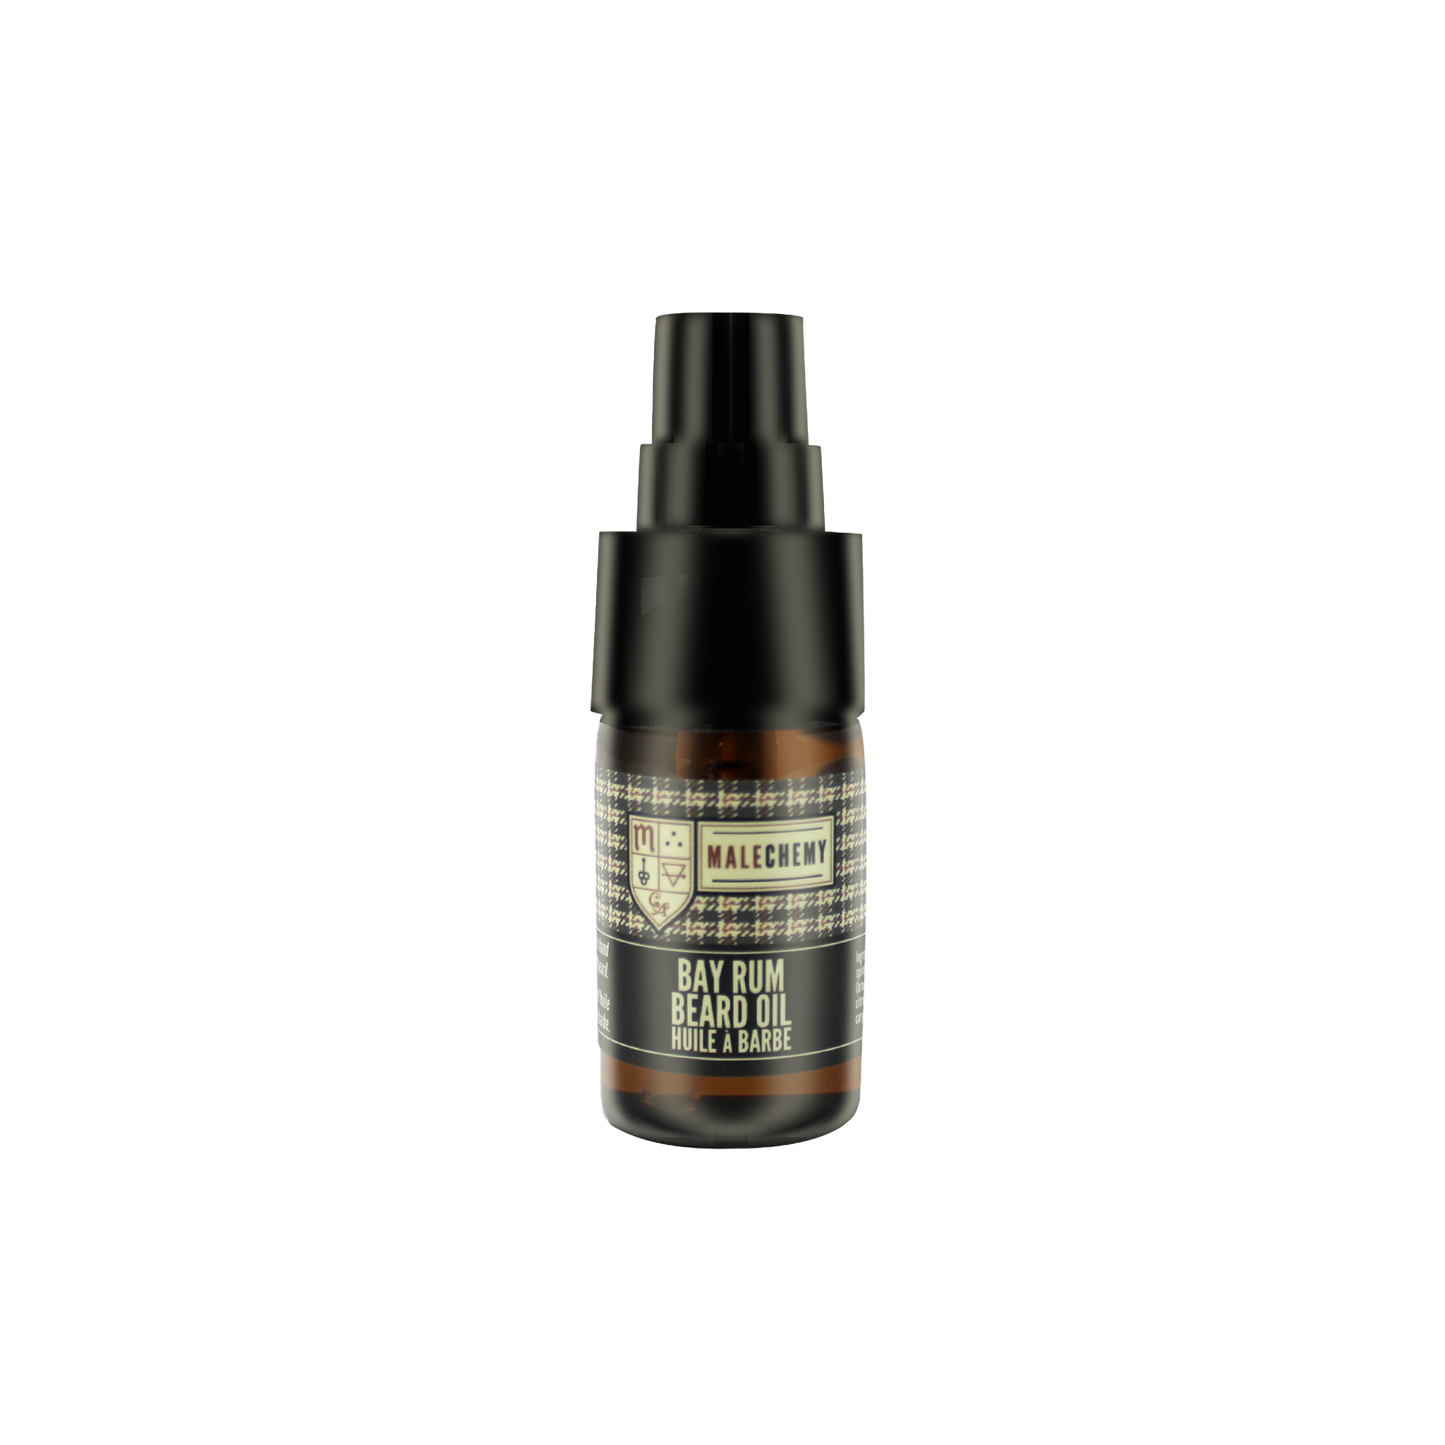 conditioning beard oil with clove, bergamot, and west indies bay leaf